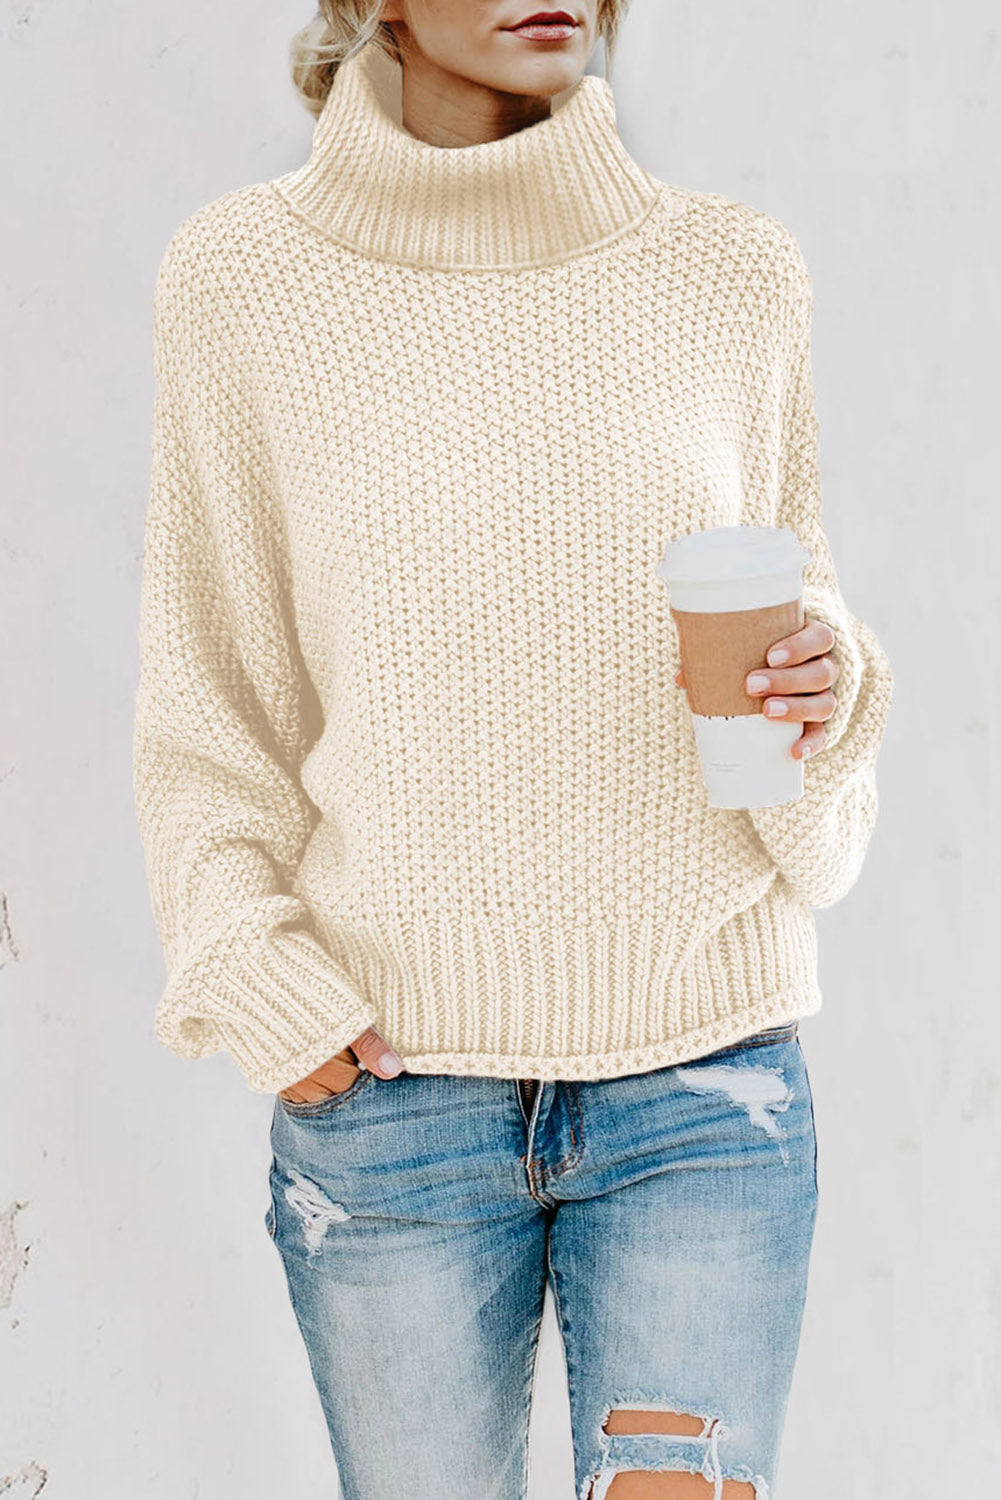 Beige Women's Winter Casual Long Sleeve Turtleneck Solid Color Drop Shoulder Cable Knit Sweater Chunky Sweater LC270200-15